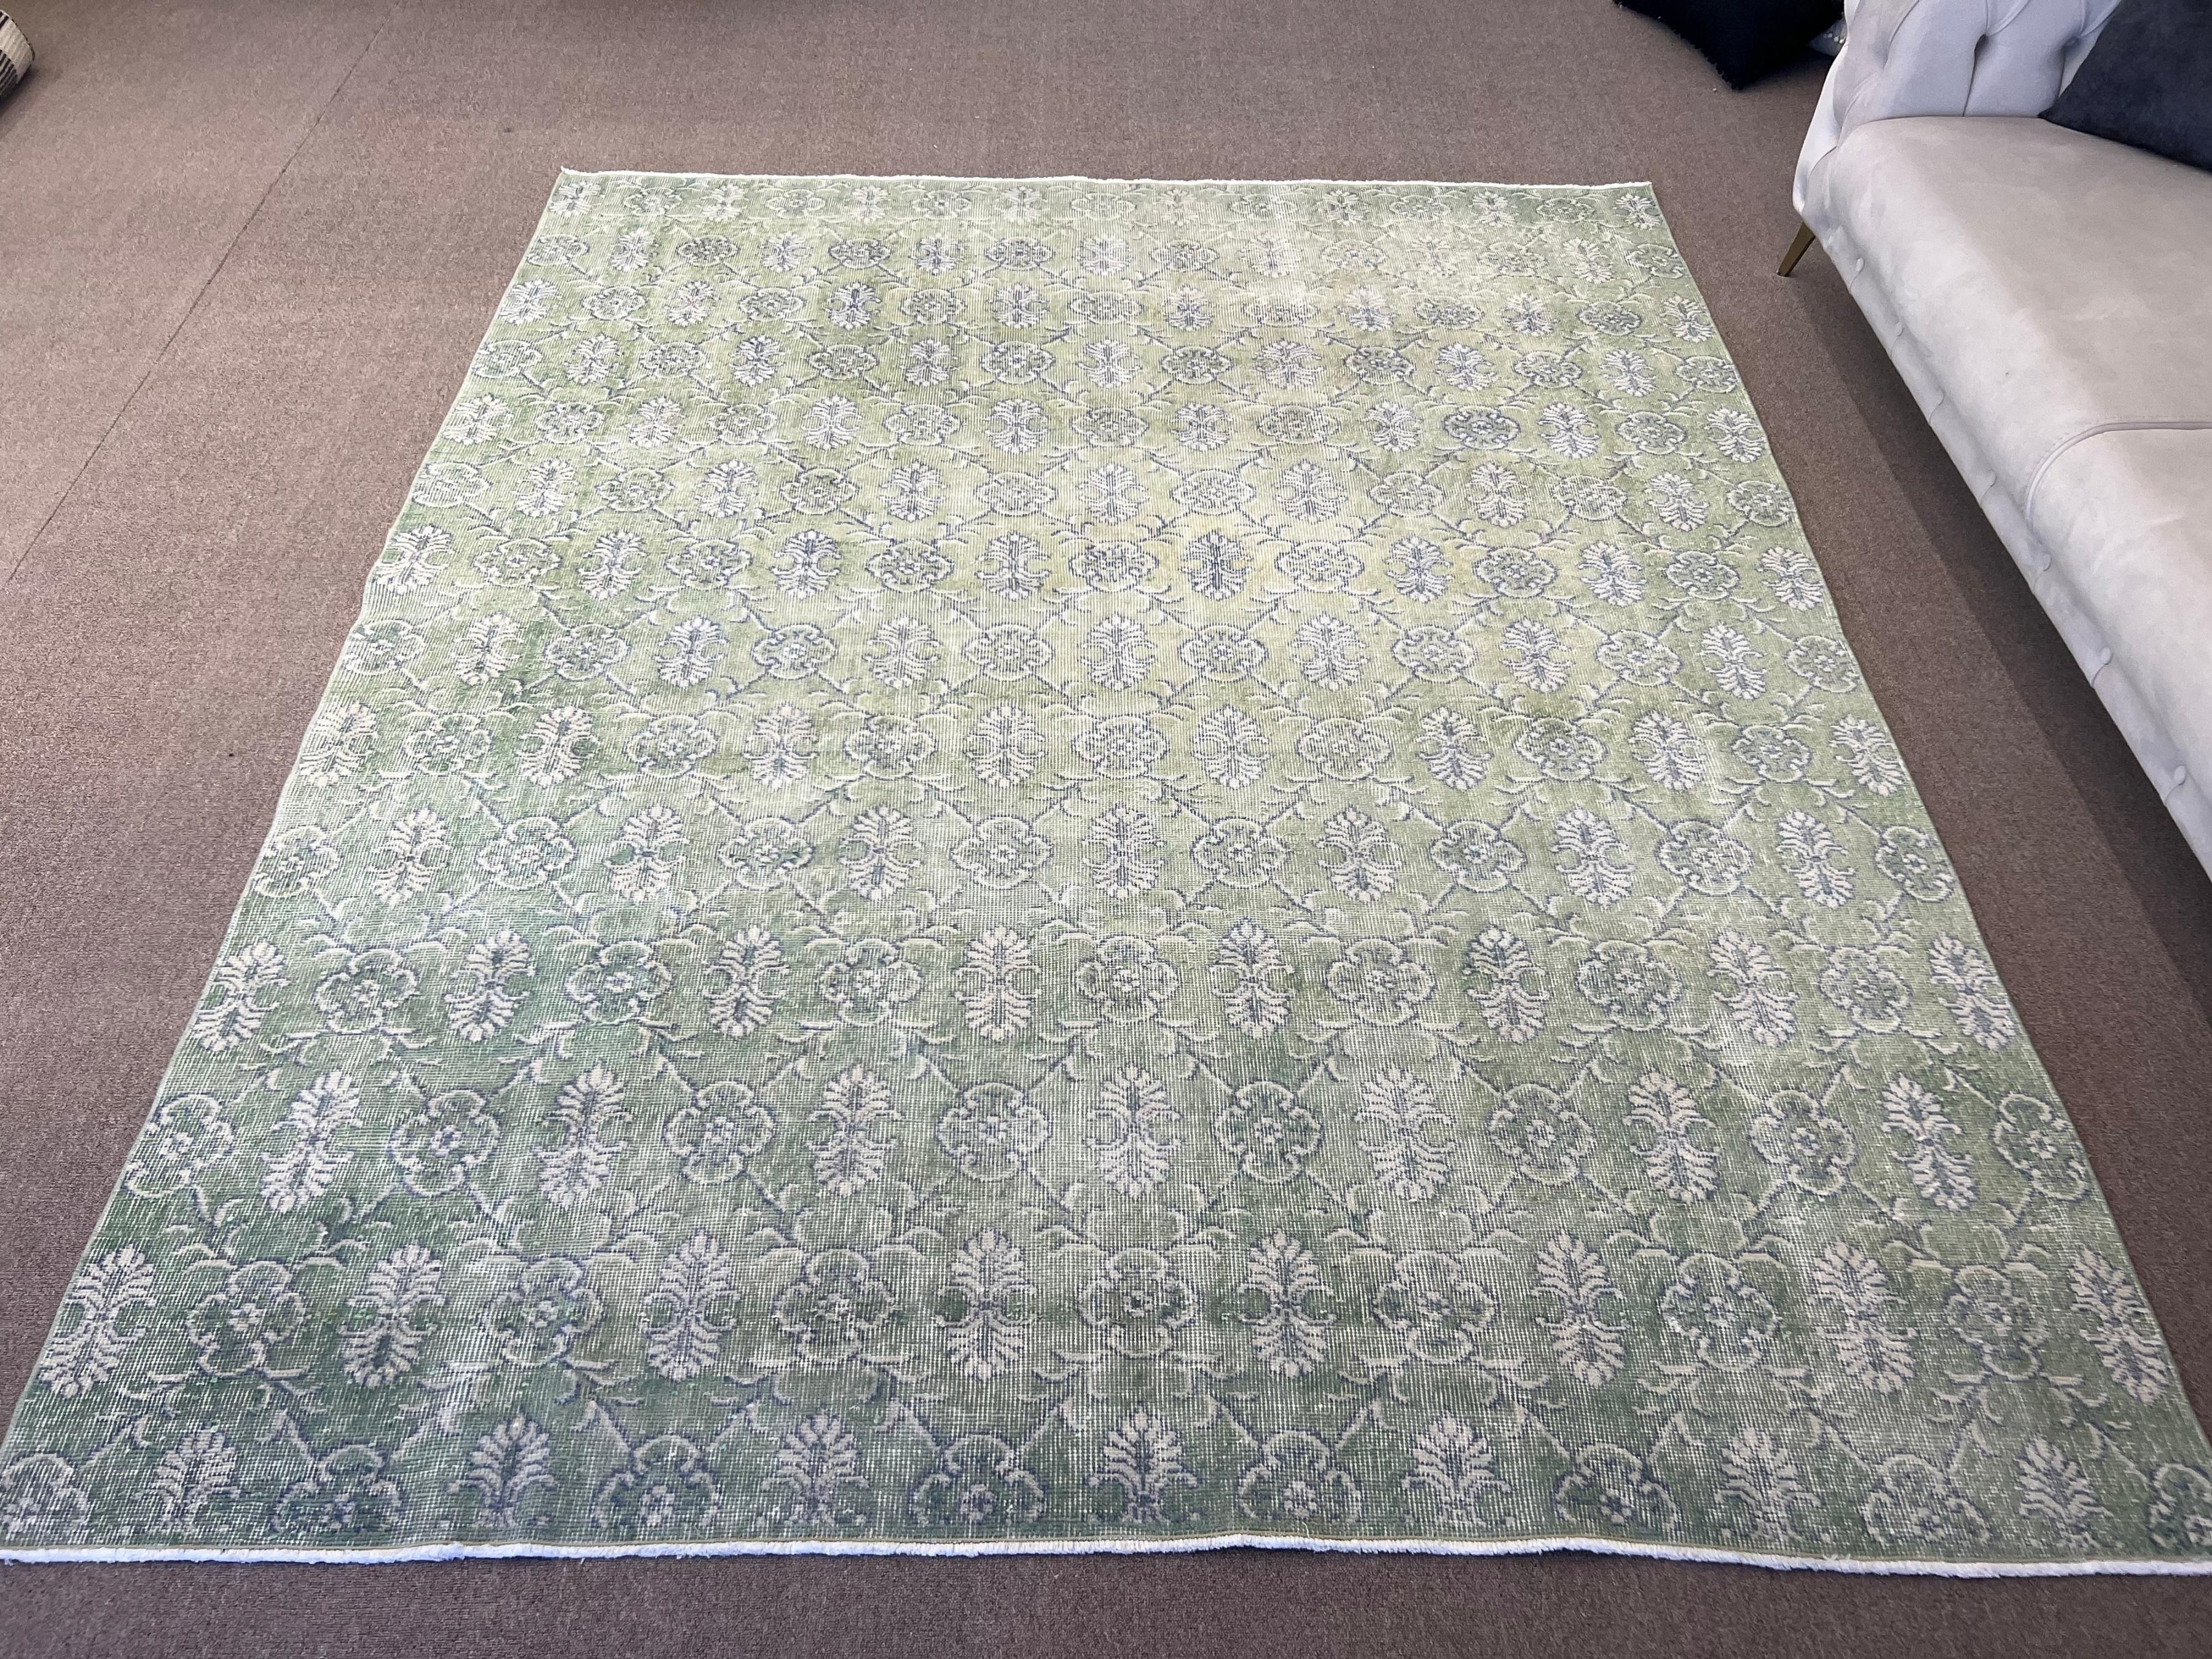 Wool 7.5x9 Ft Handmade Vintage Turkish Area Rug in Green with All-Over Floral Design